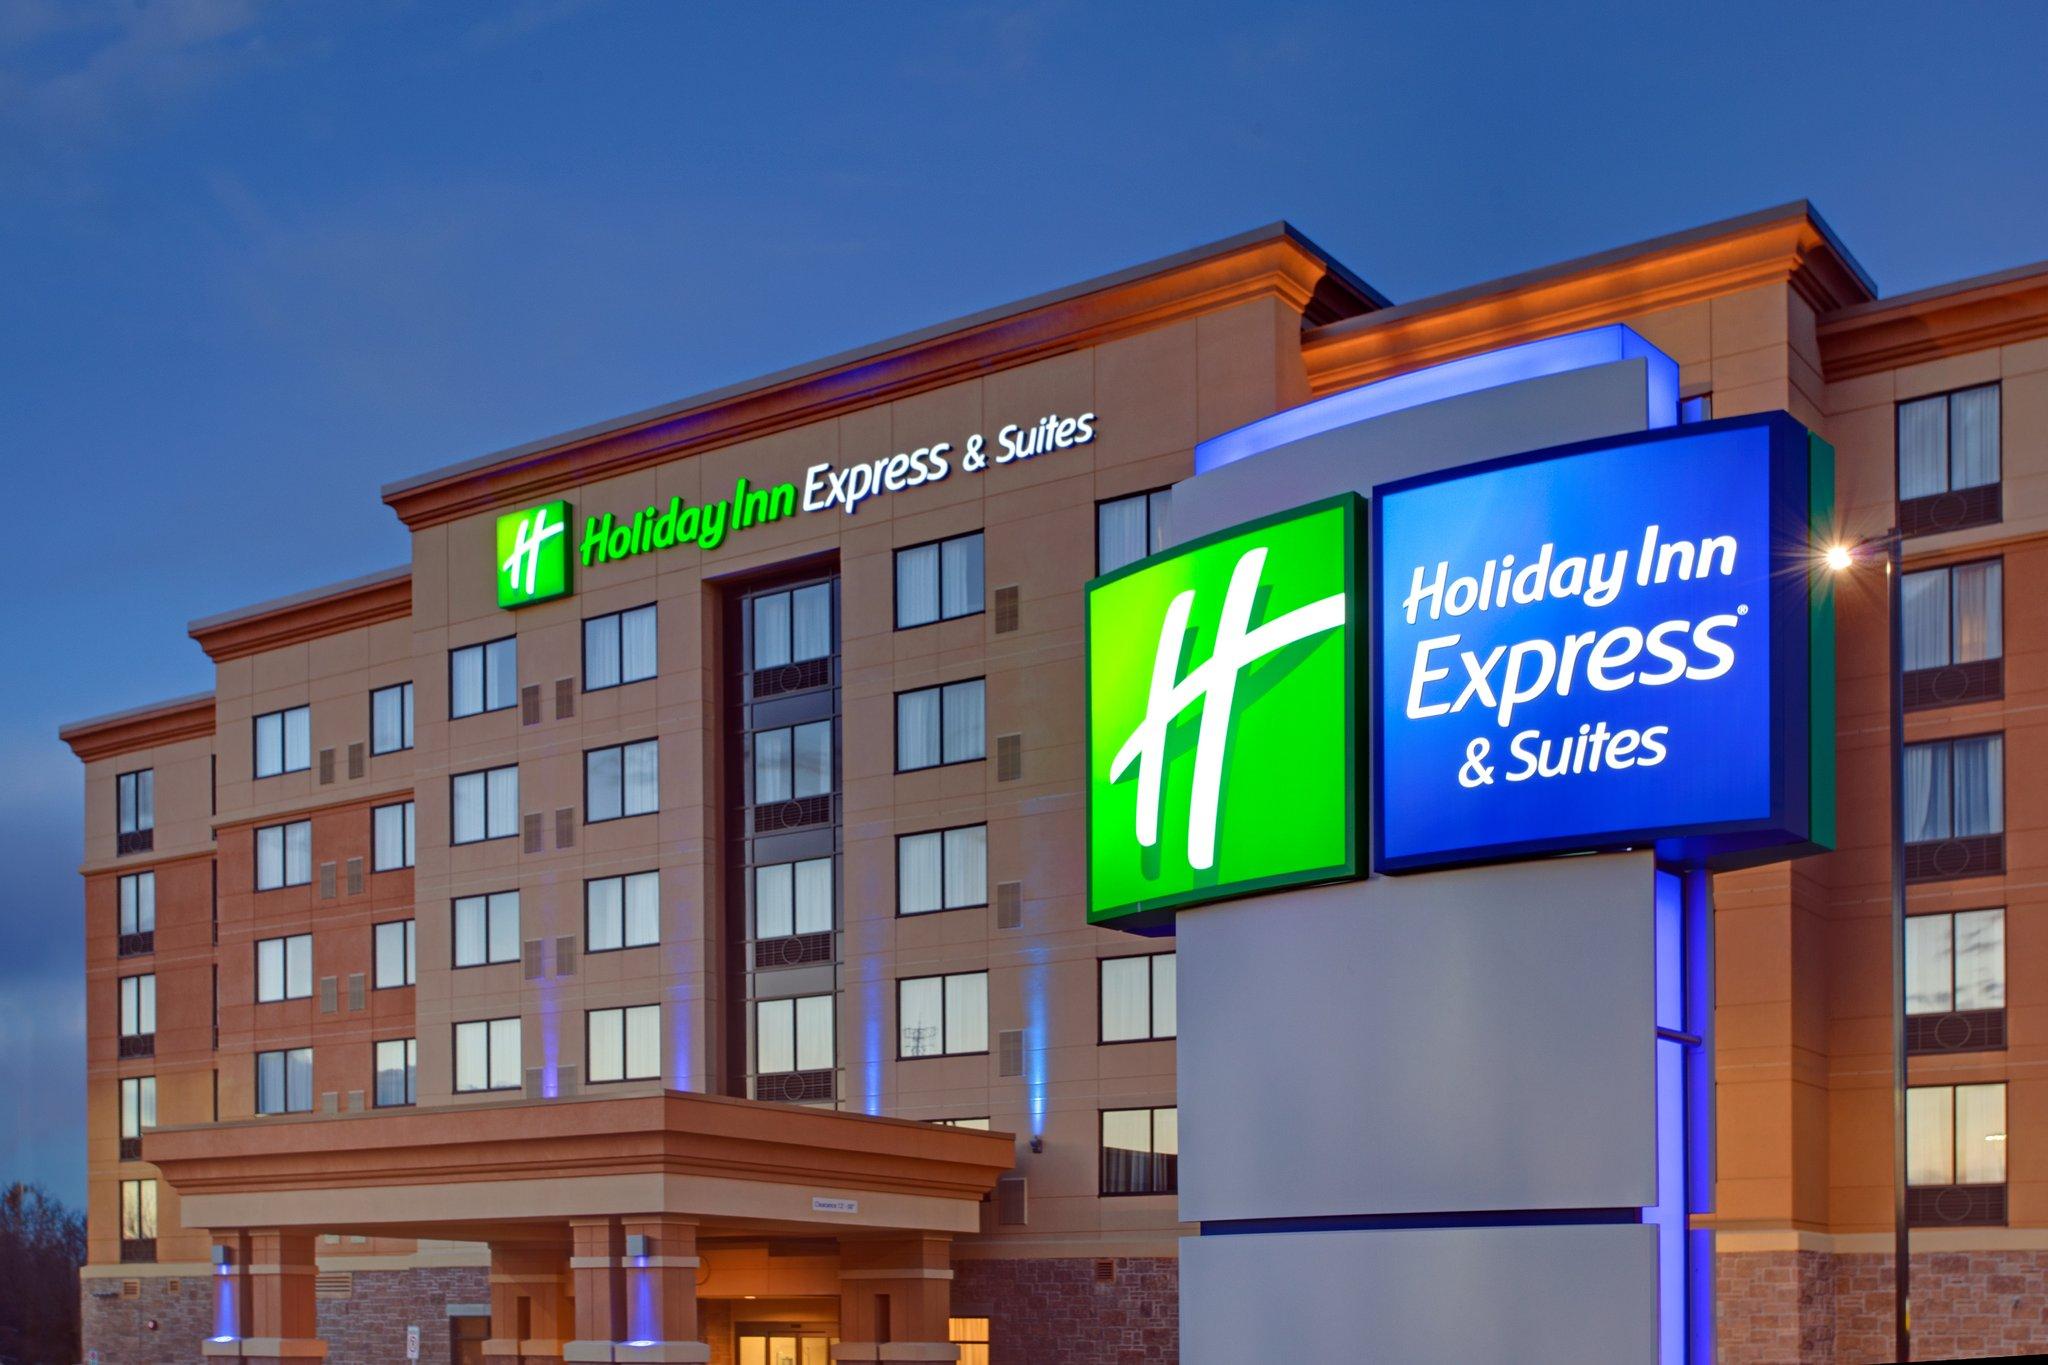 Holiday Inn Express & Suites Ottawa West - Nepean in Ottawa, ON